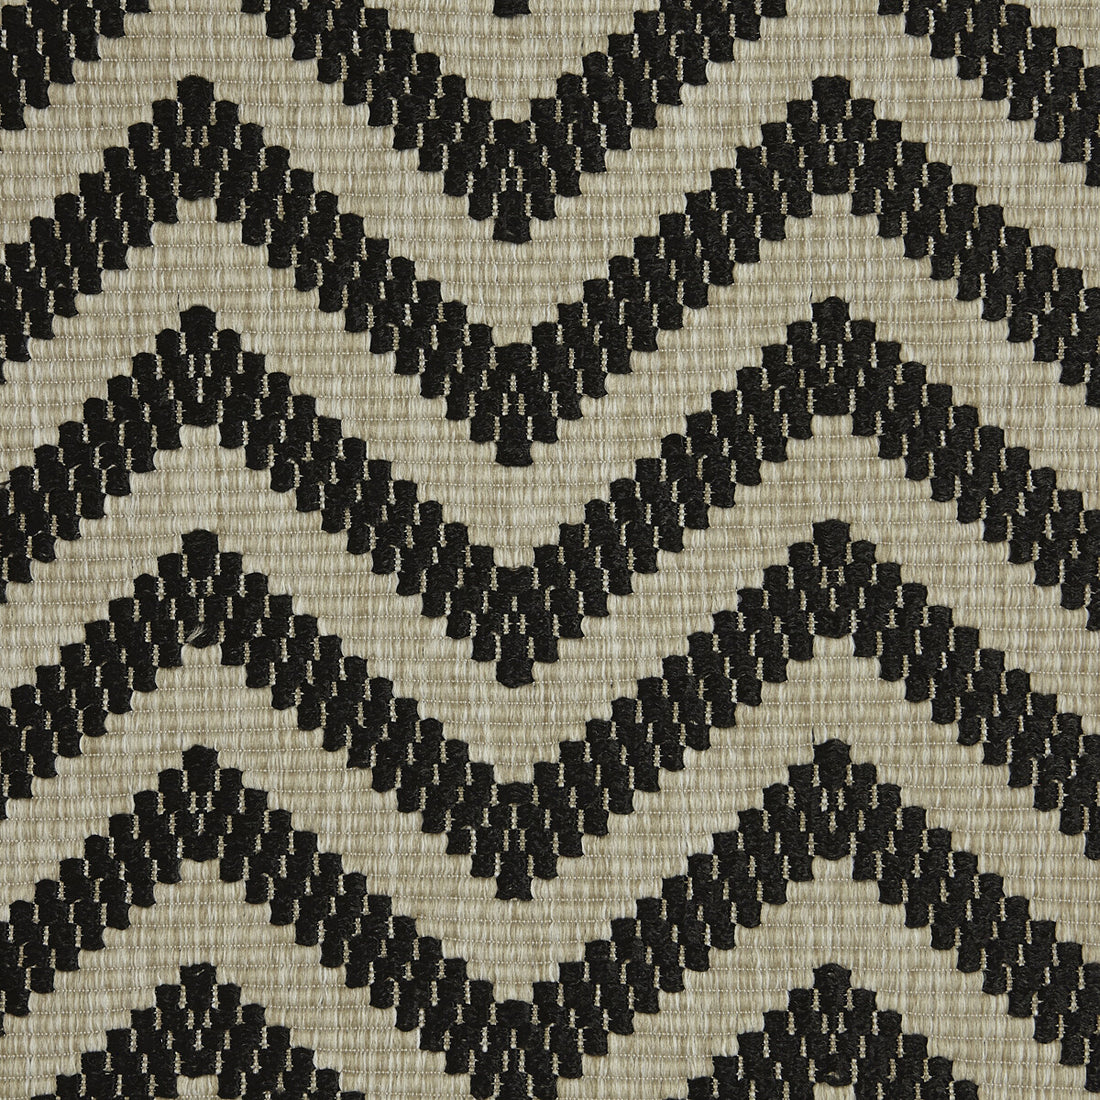 Marelle fabric in 0 color - pattern LZ-30347.00.0 - by Kravet Design in the Lizzo Indoor/Outdoor collection